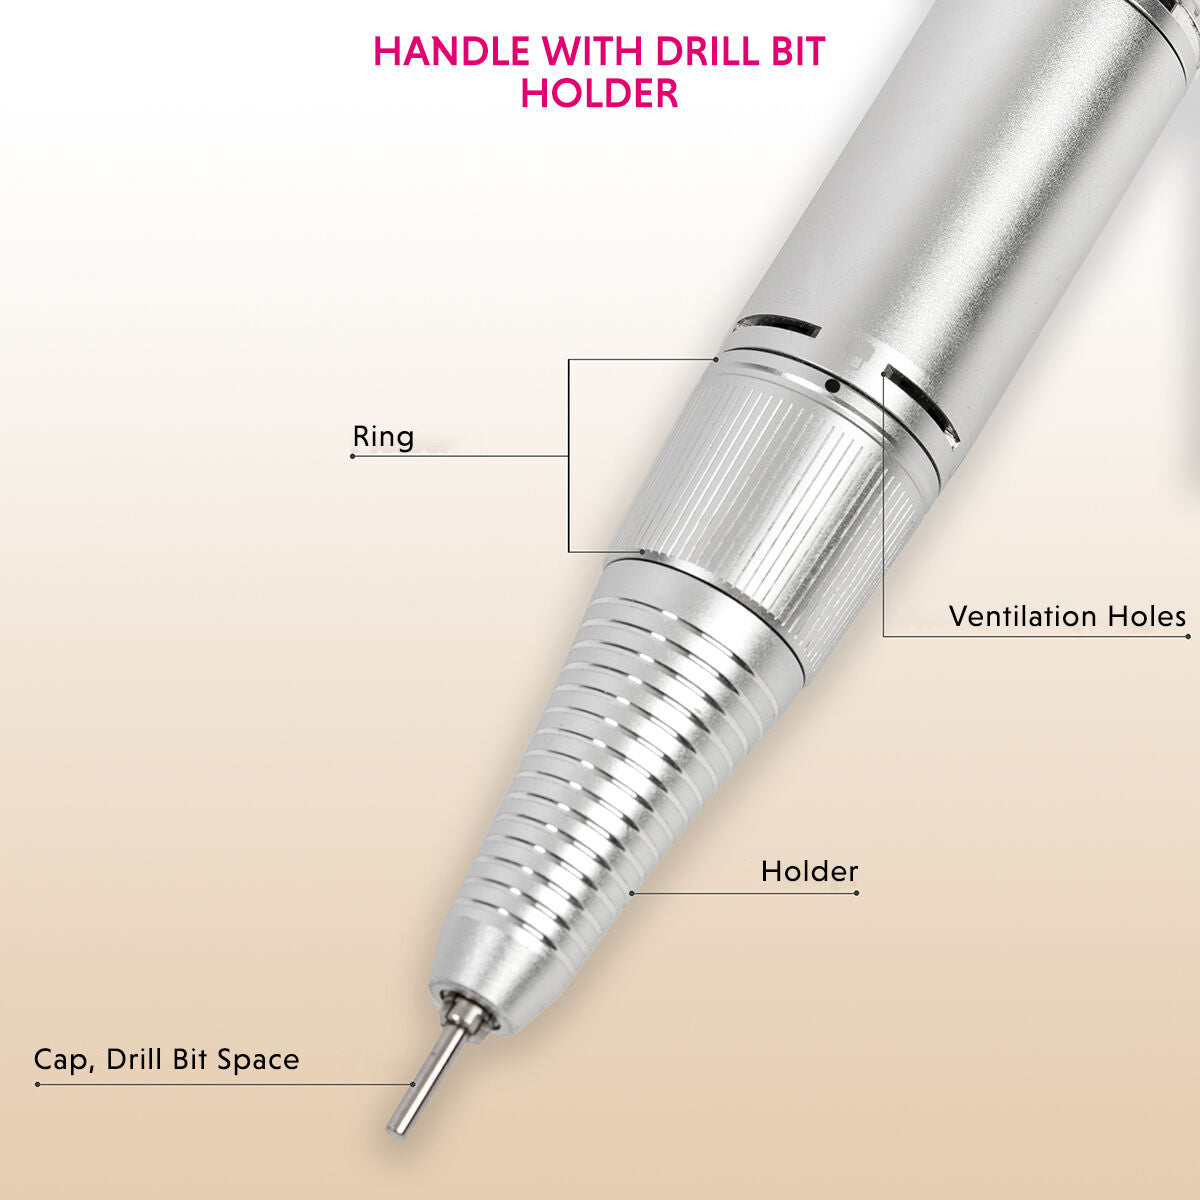 HANDLE WITH DRILL BIT HOLDER